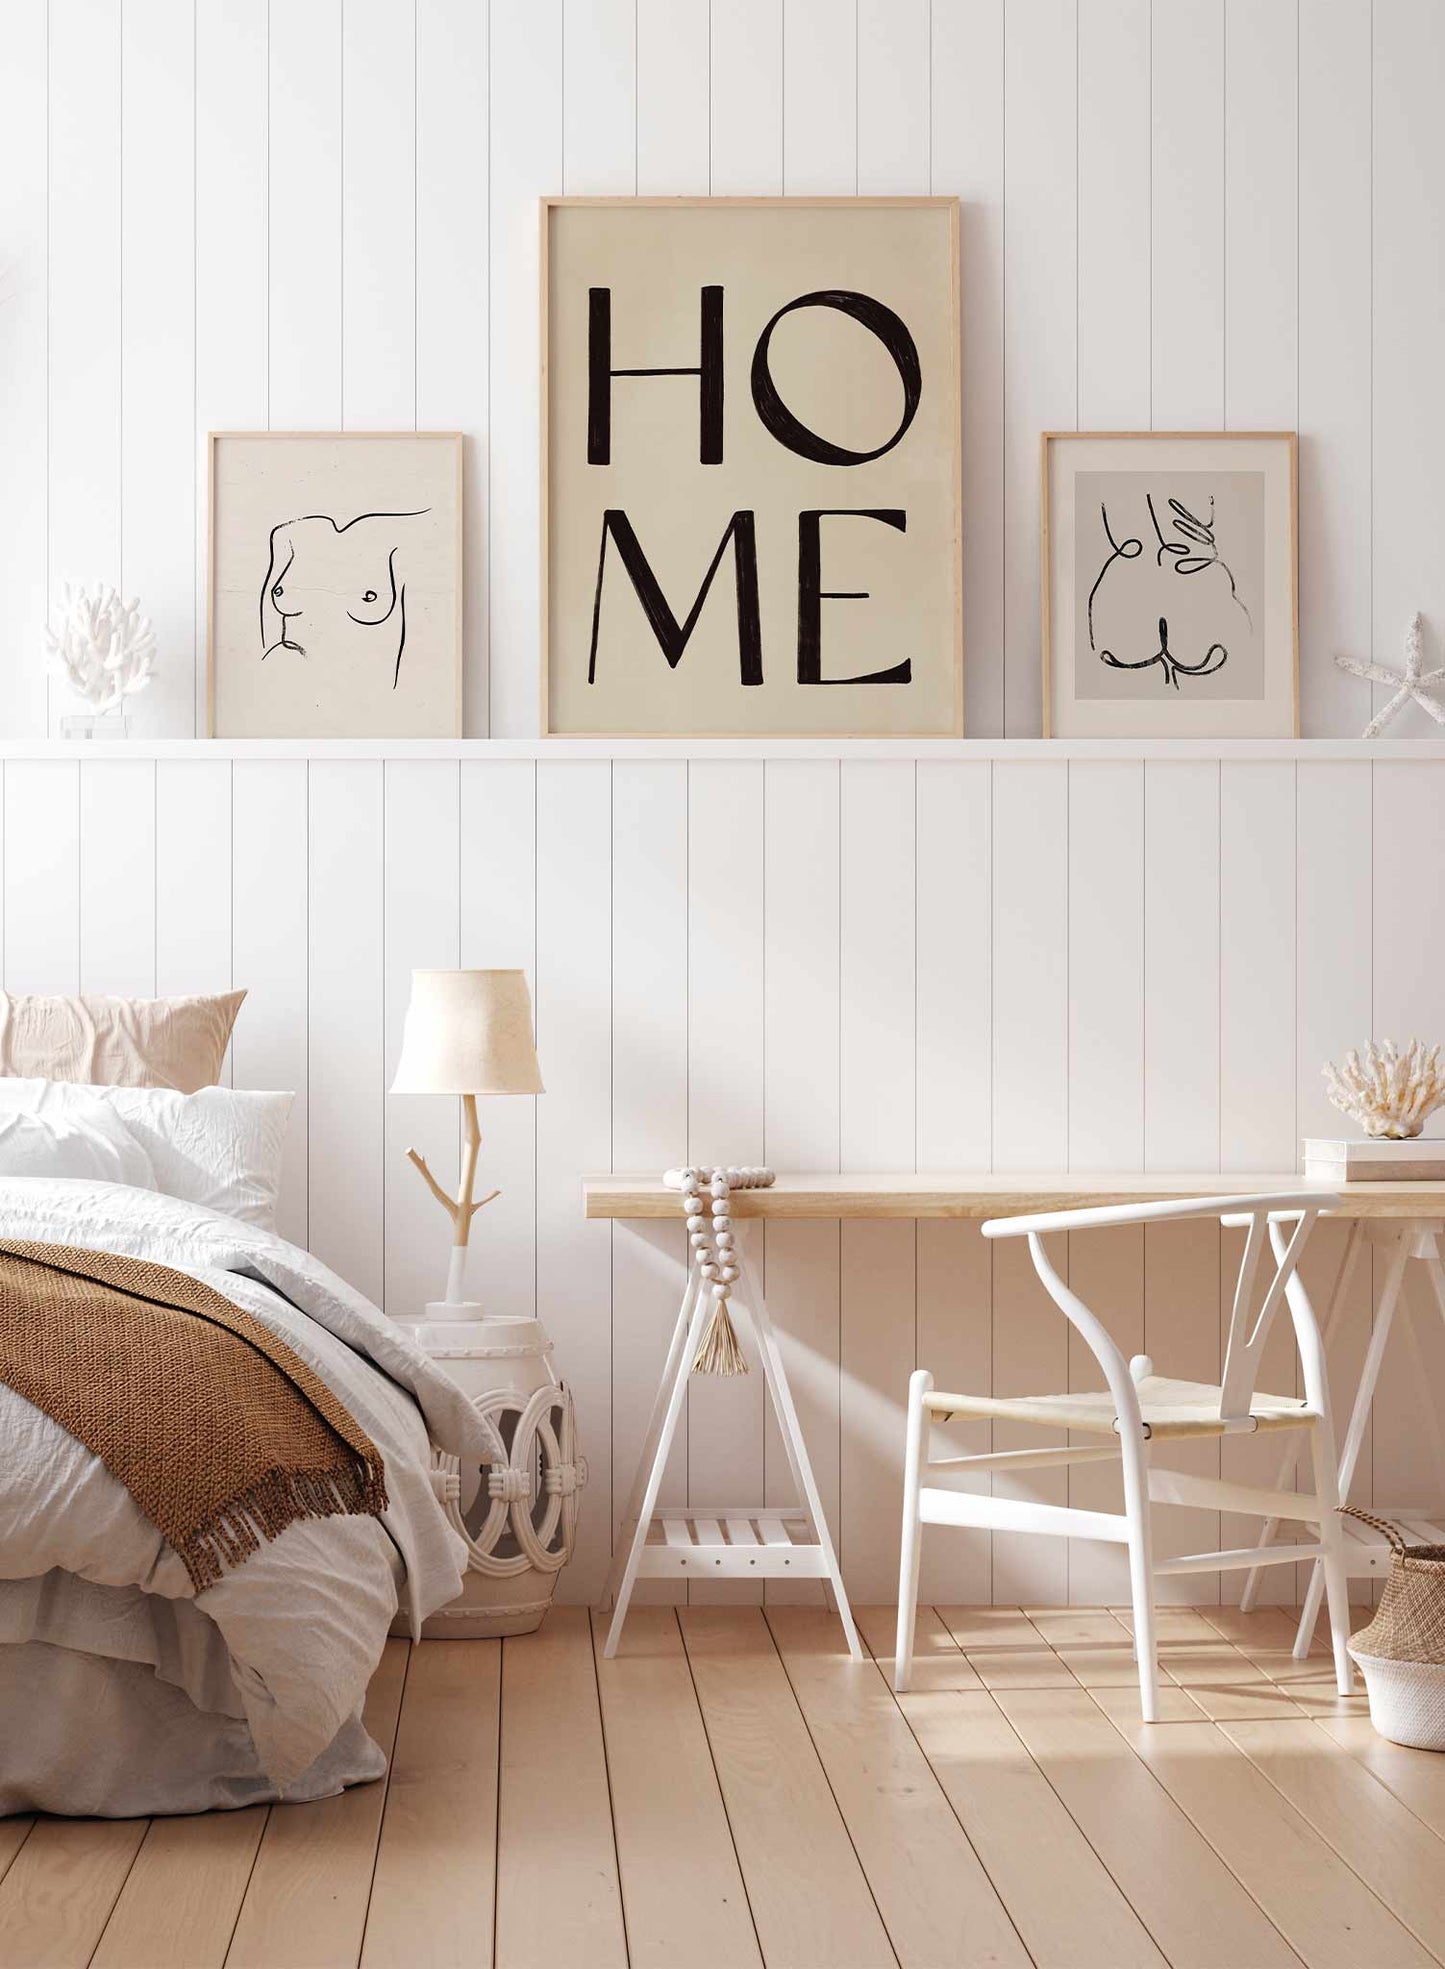 Come Home is a typography and illustration of the word 'Home' written in big font by Audrey Rivet in collaboration with Opposite Wall.